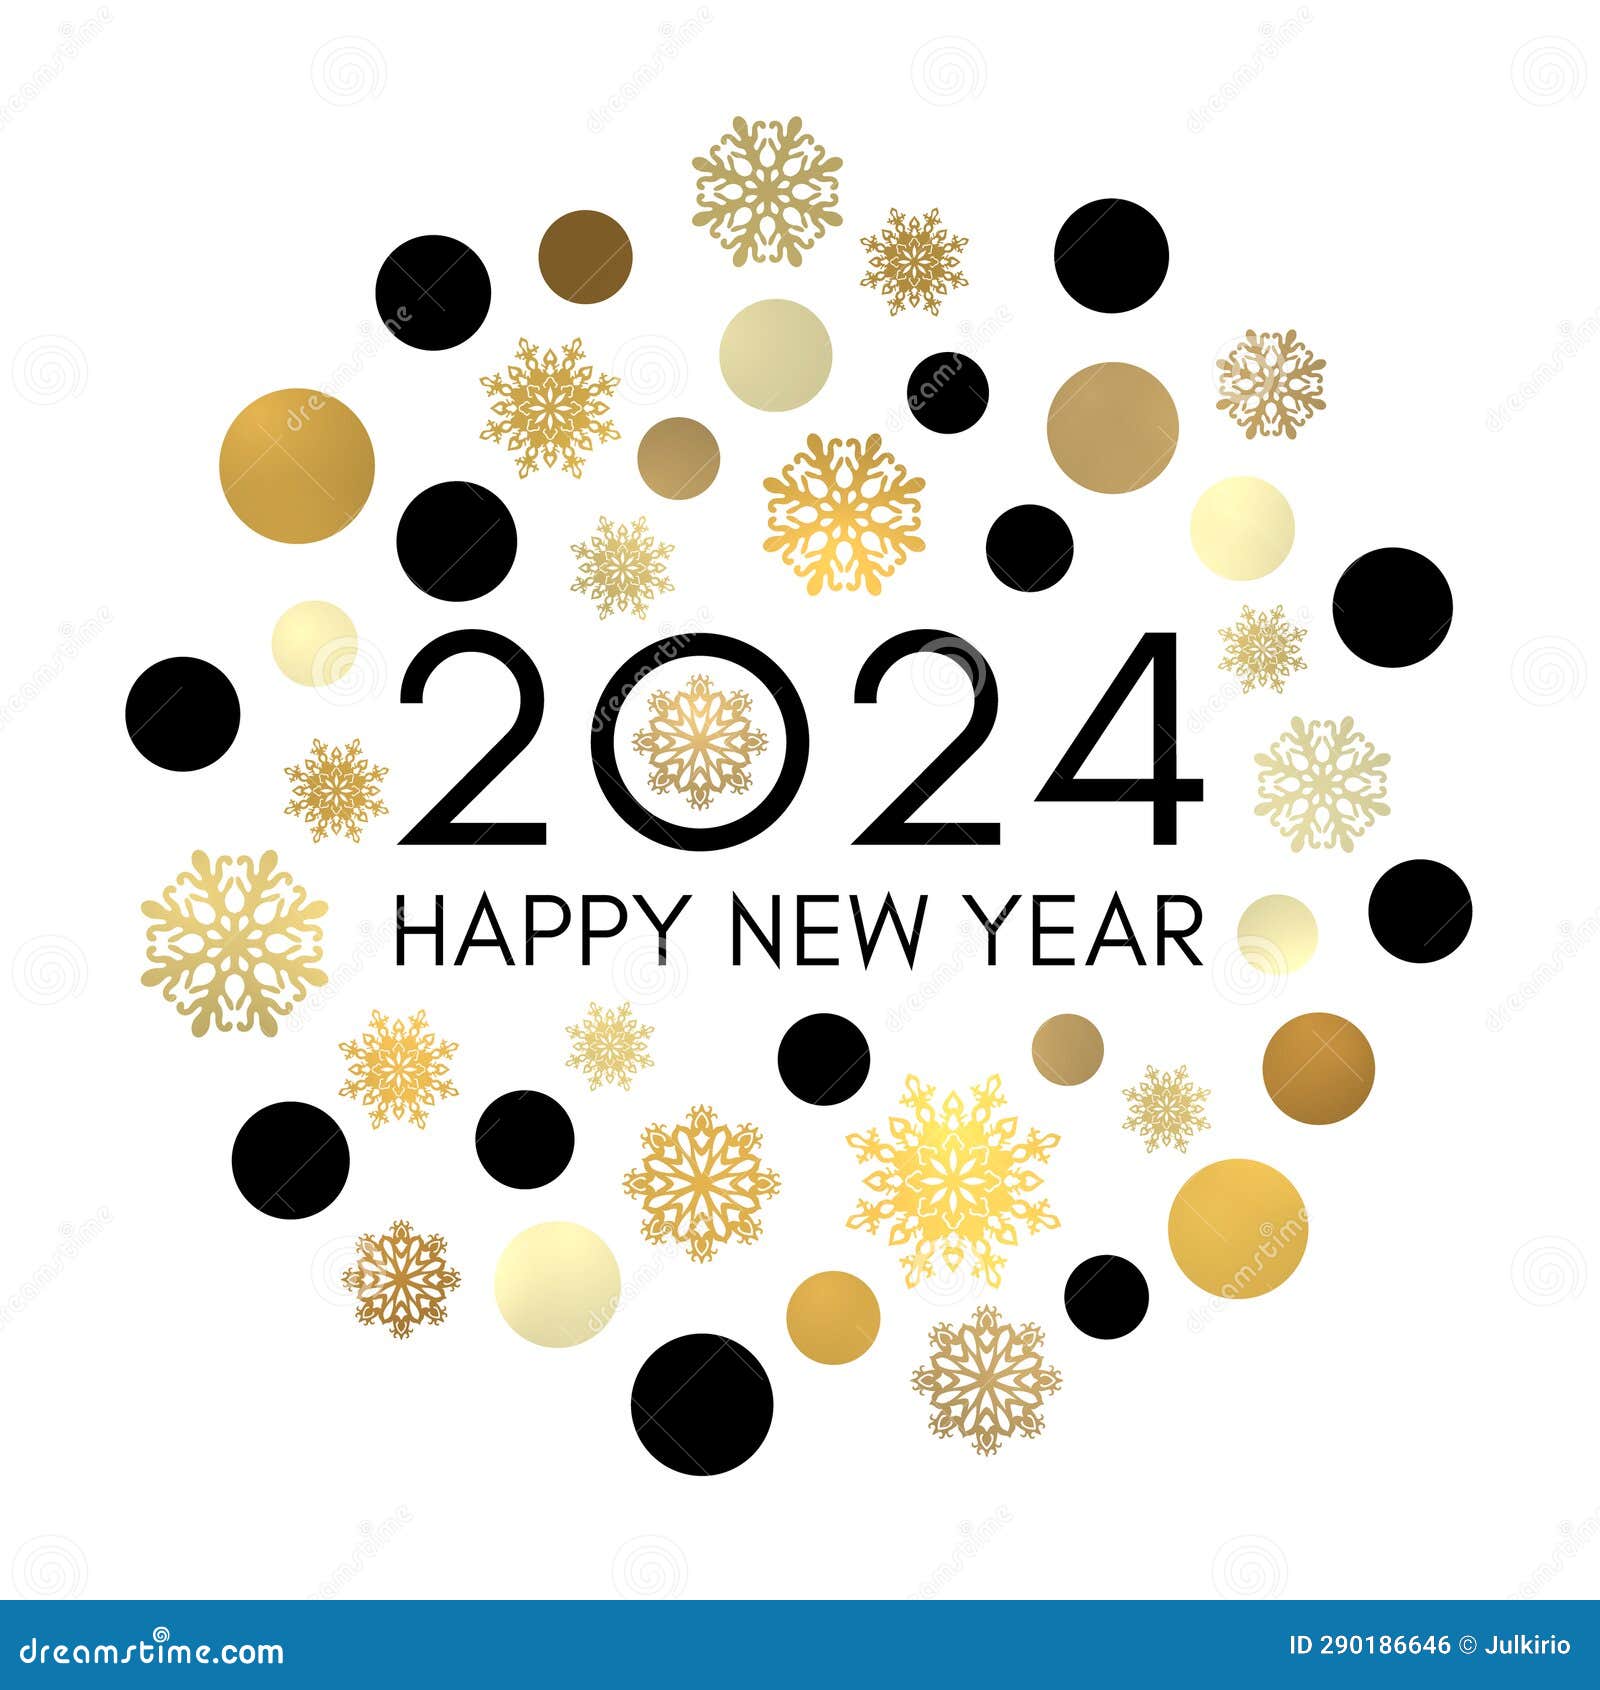 happy new year 2024 circle concept.